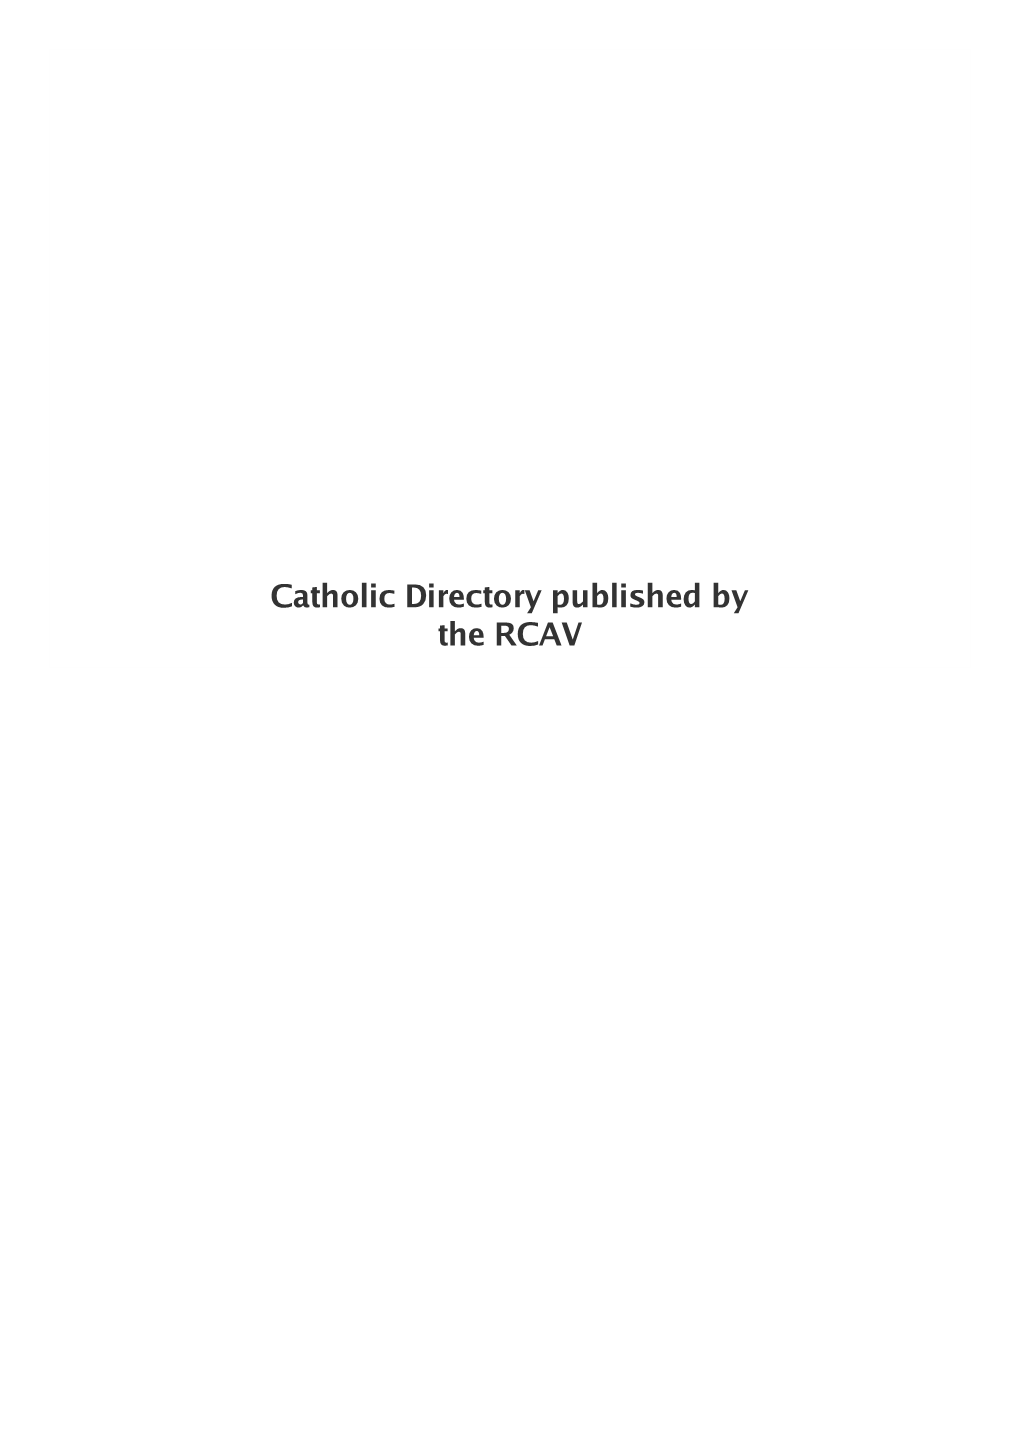 Catholic Directory Published by the RCAV Vancouver